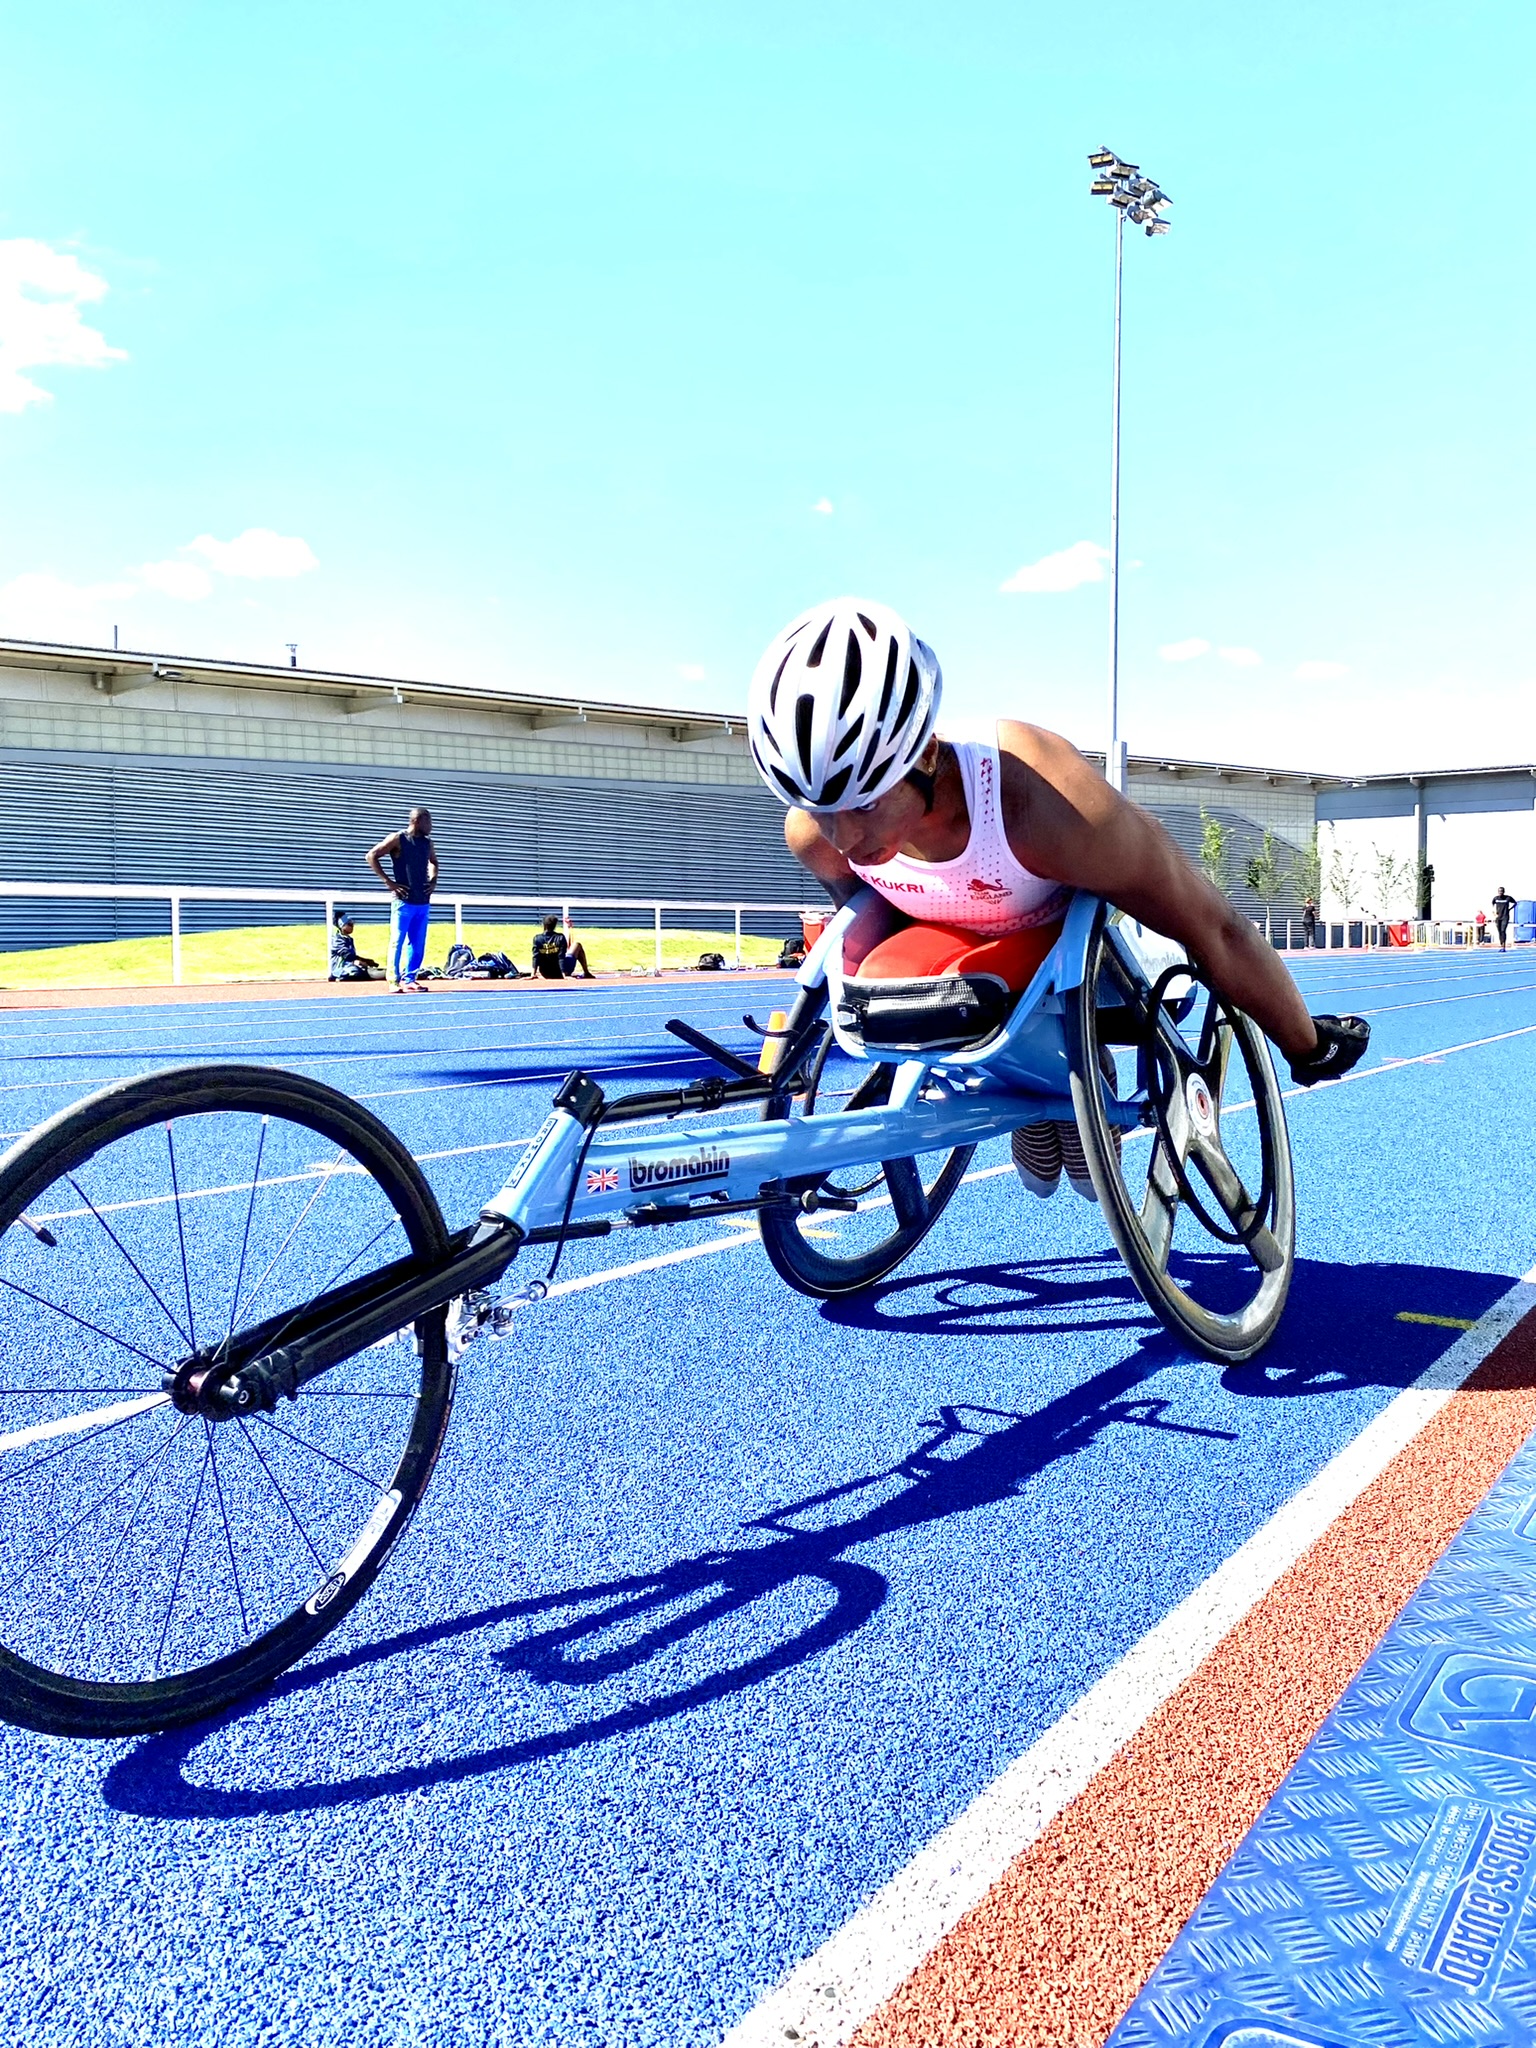 Black female pushing a sky blue racing wheelchair, wearing a white helmet and red and white Team England kit. Background- dark blue athletics track.